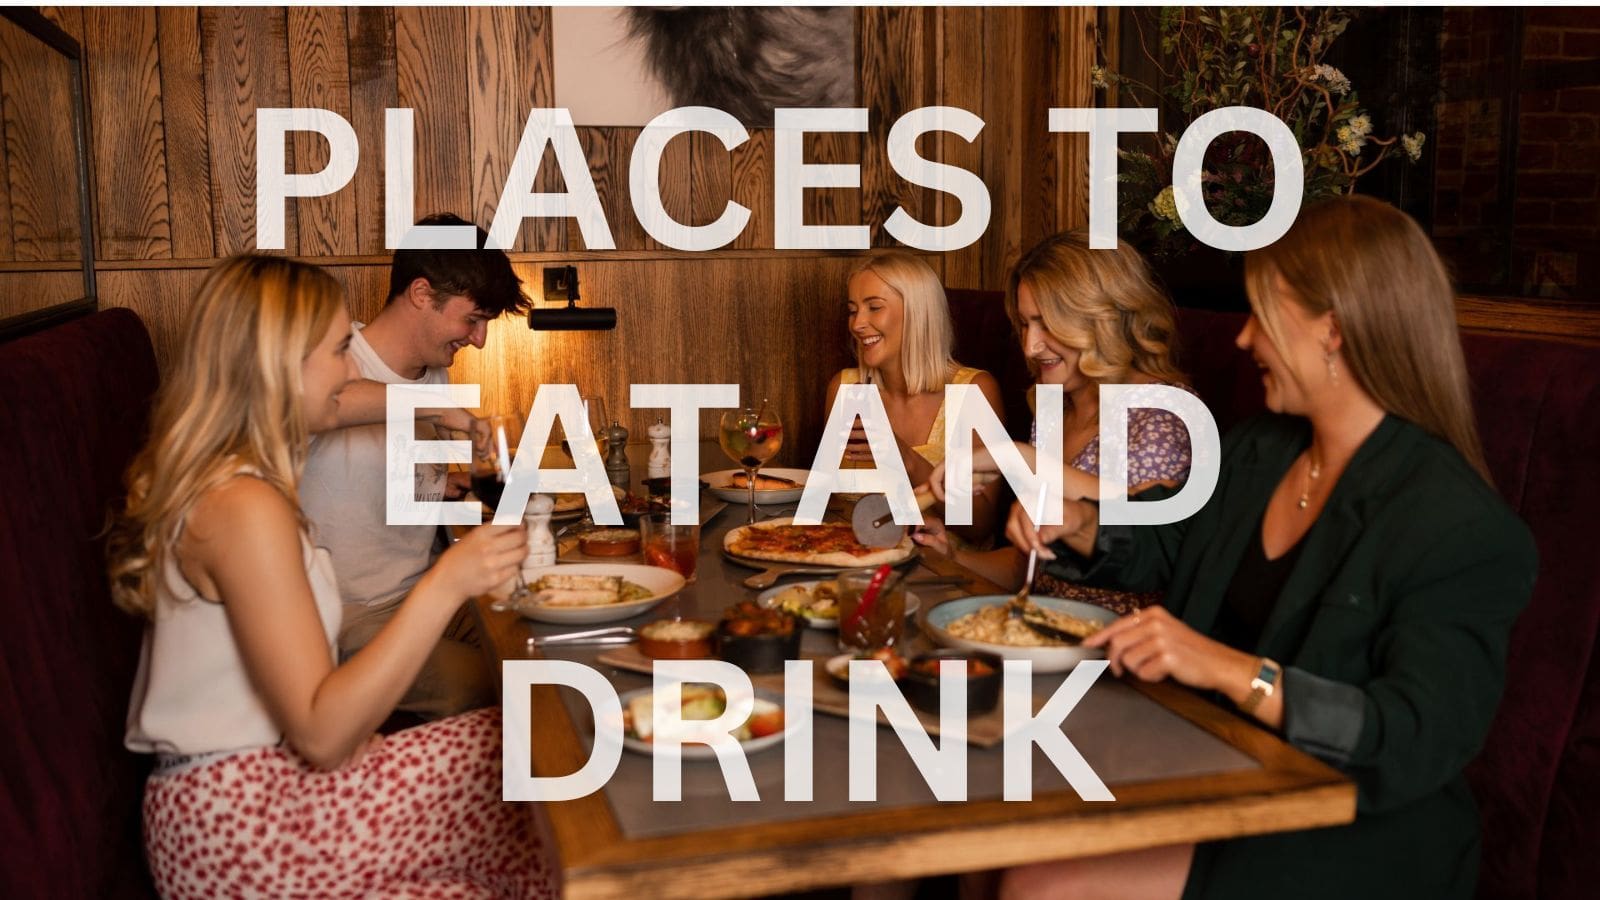 places-to-eat-and-drink---website-format-min.jpg